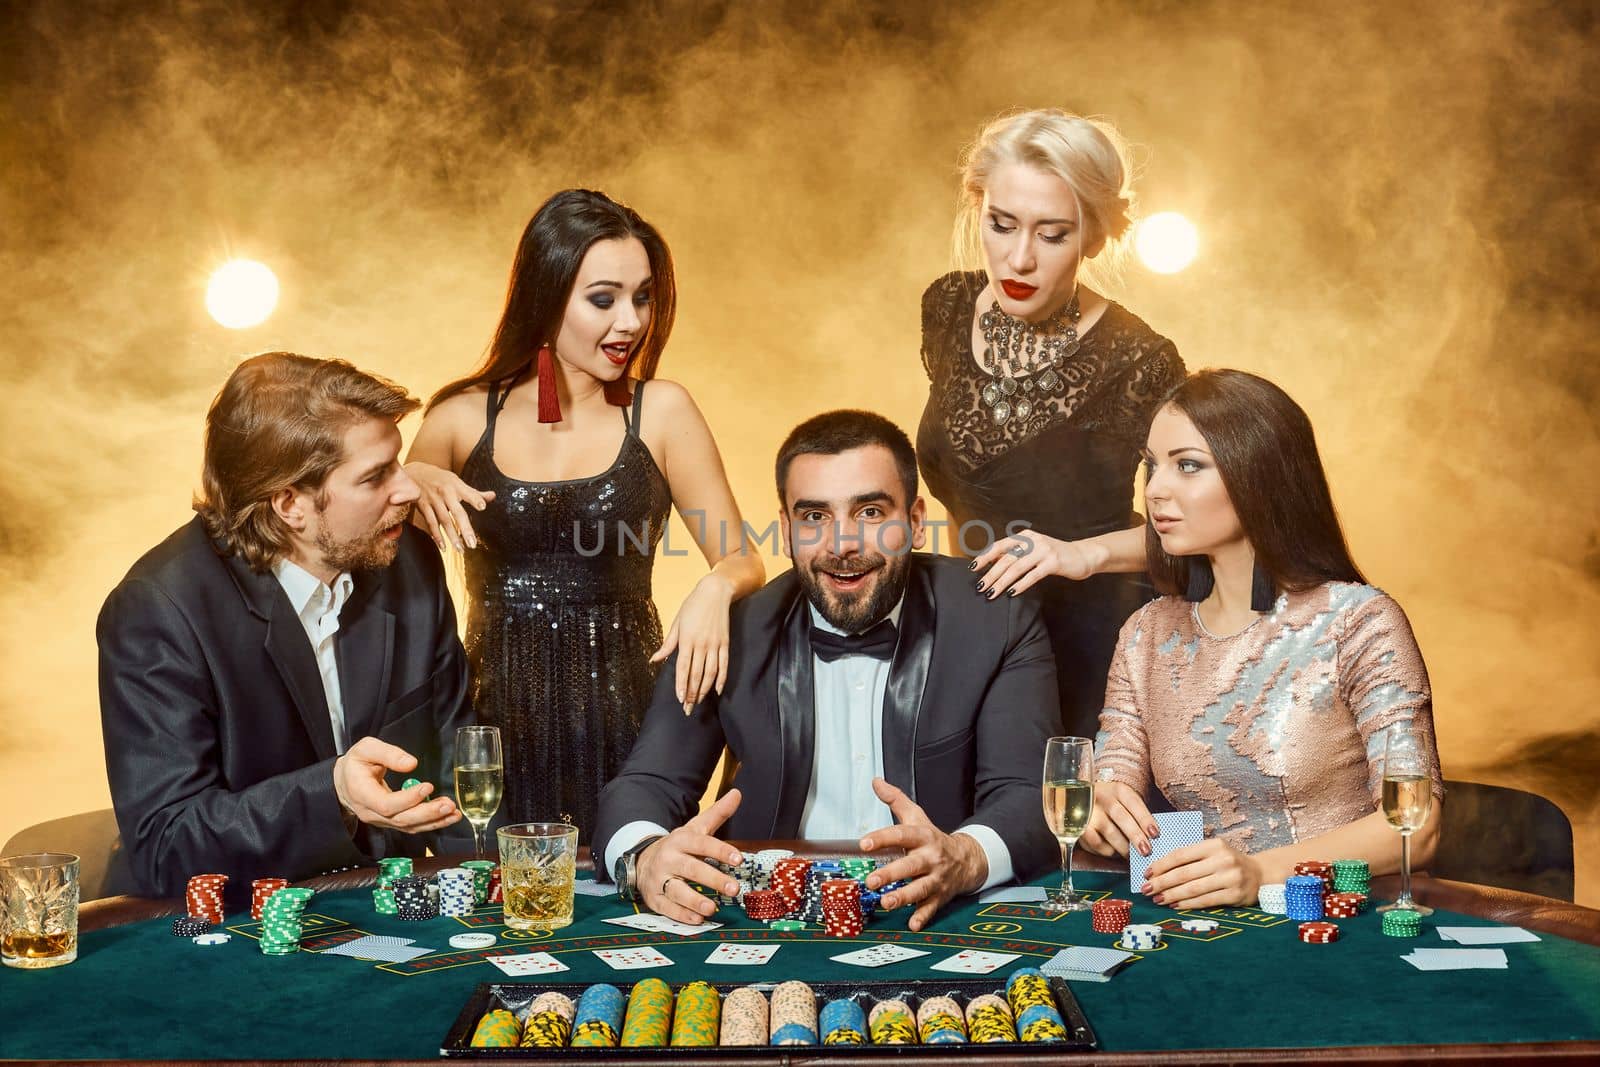 Poker players sitting around a table at a casino. by nazarovsergey